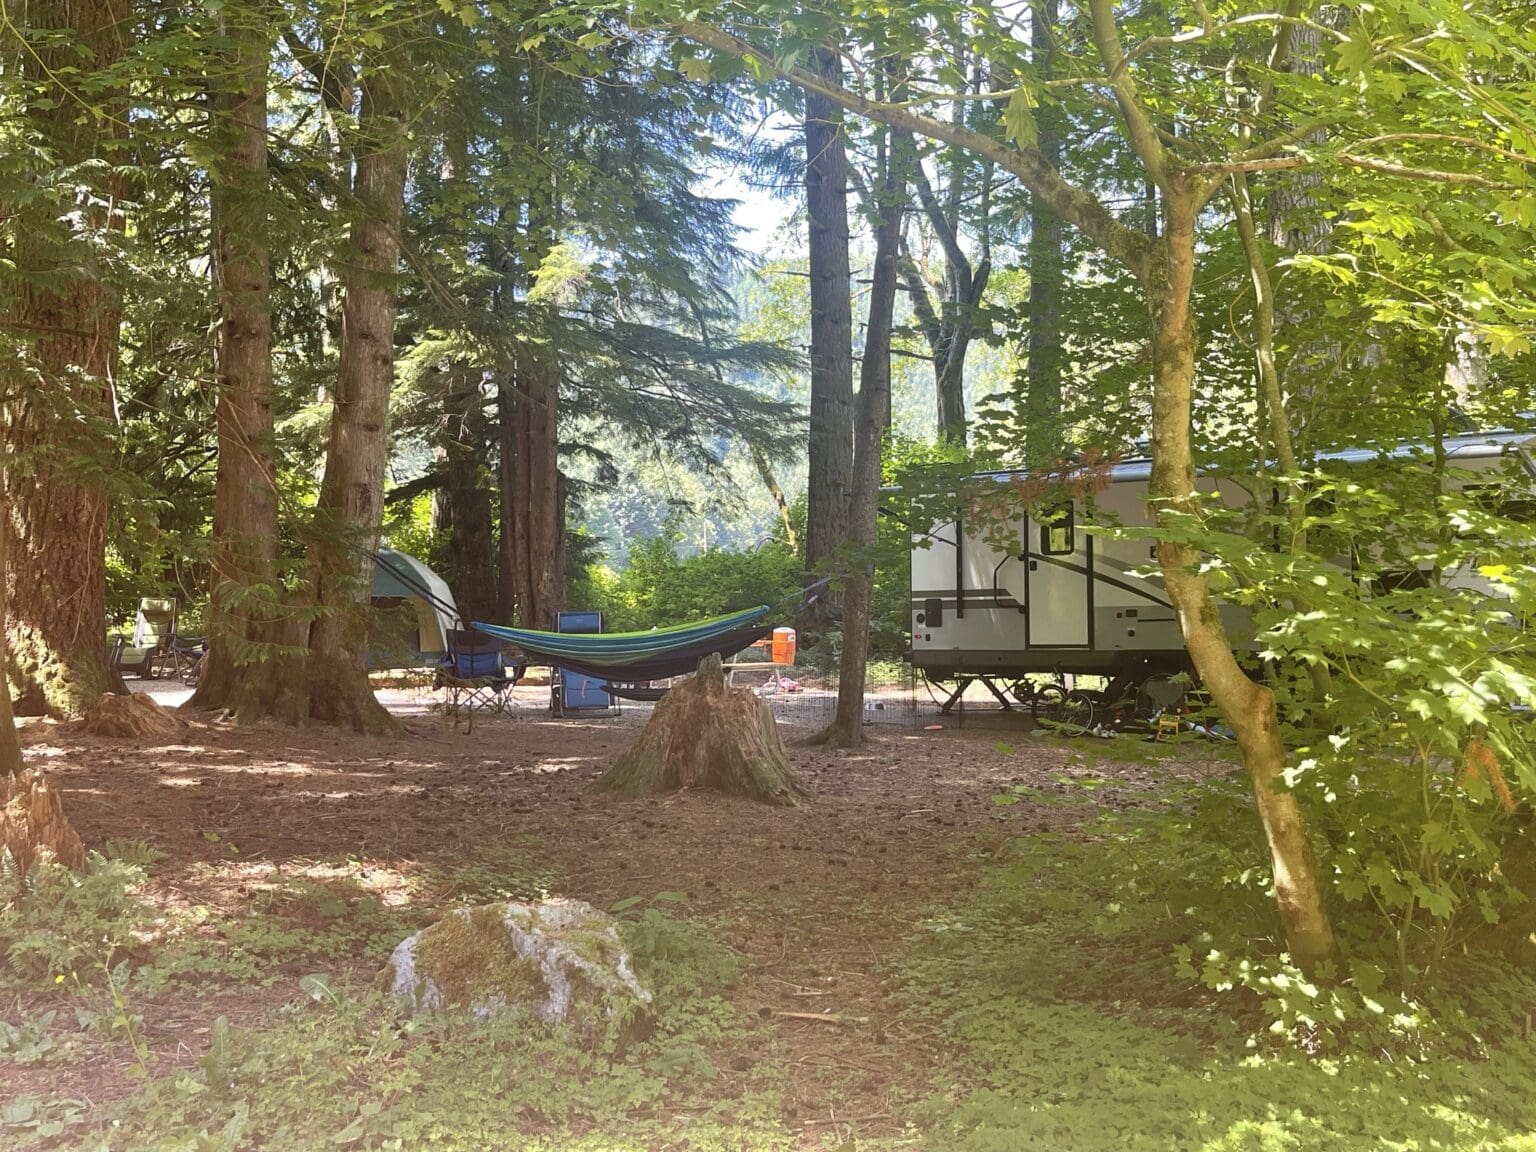 The Maple Creek Campground at Silver Lake Park has a trailer parked near a hammock.